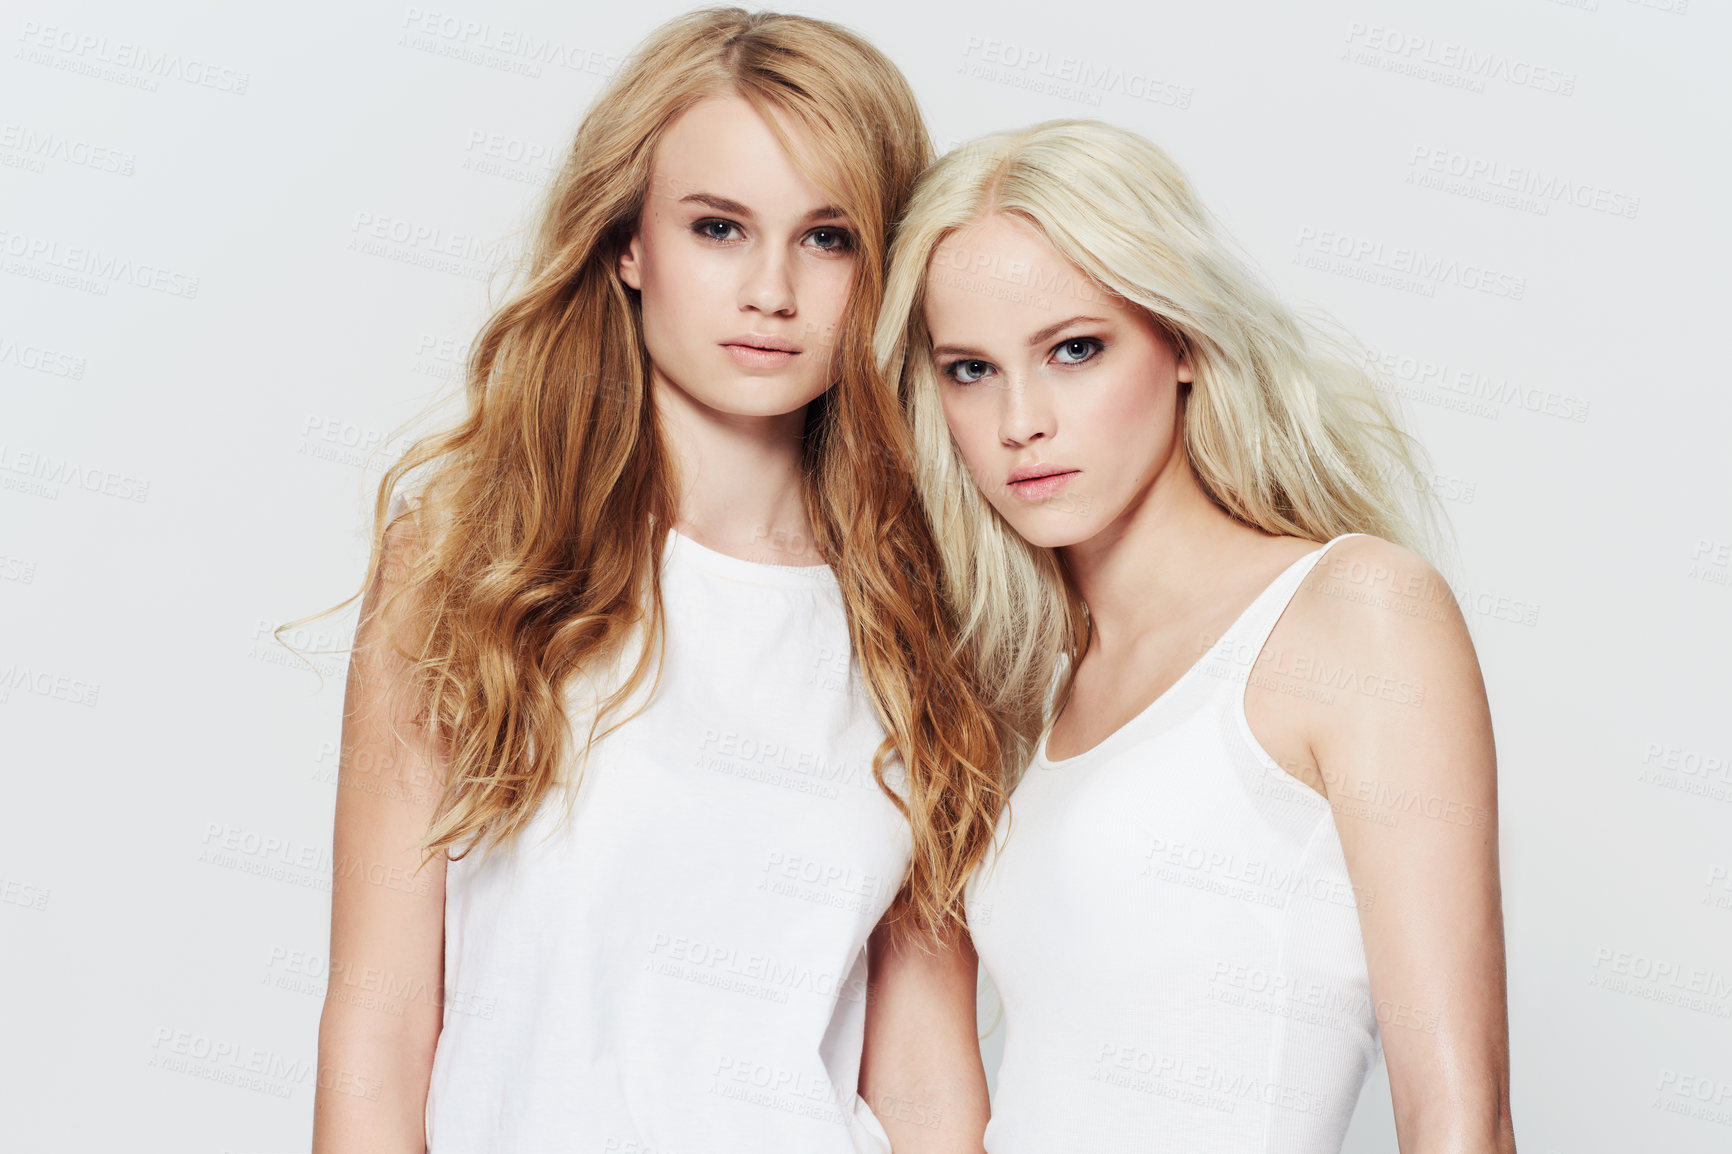 Buy stock photo Studio portrait of two young models against a white background